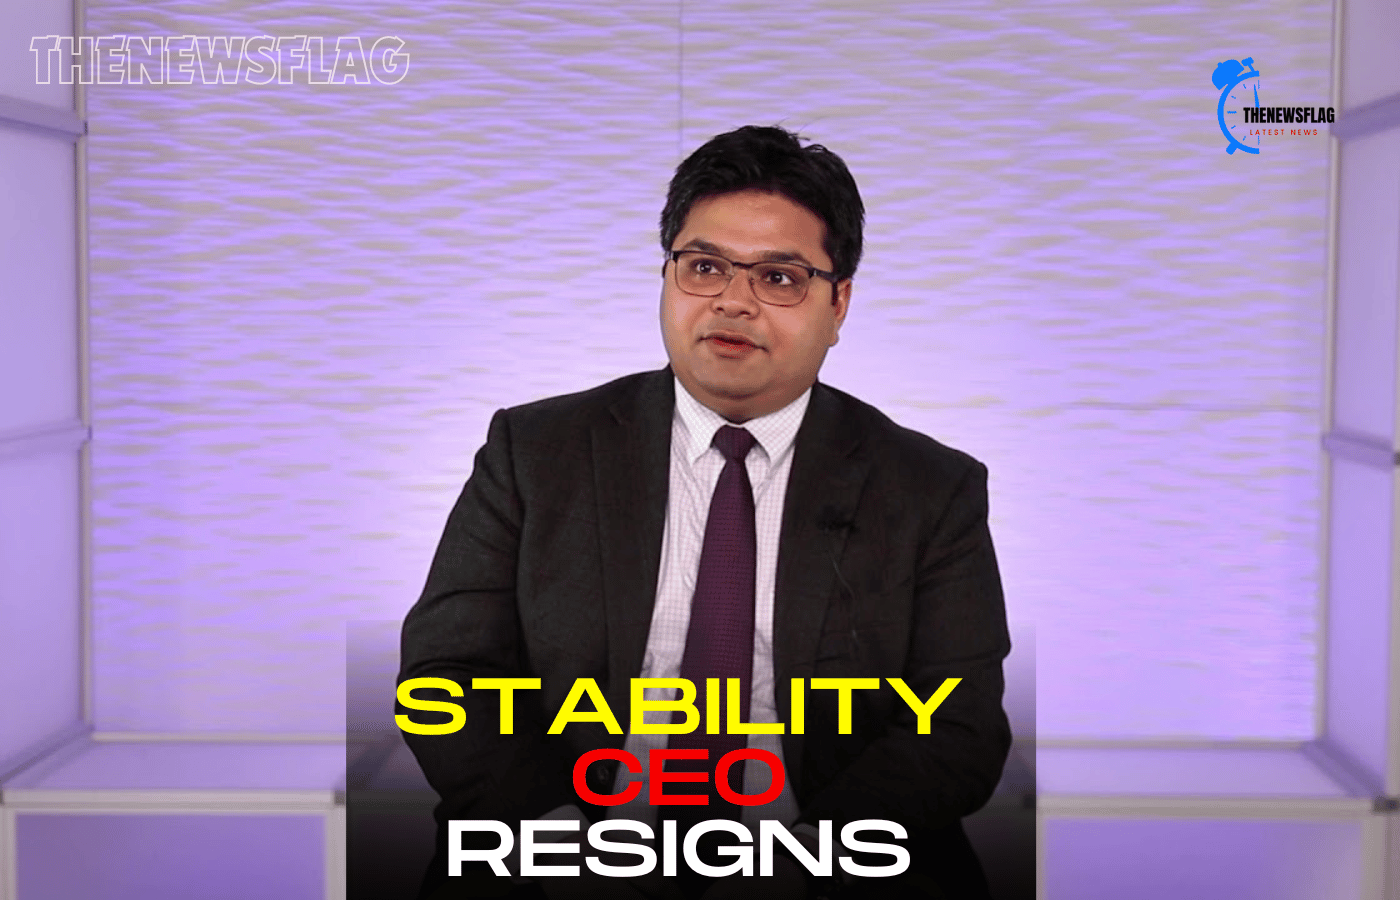 Stability CEO resigns